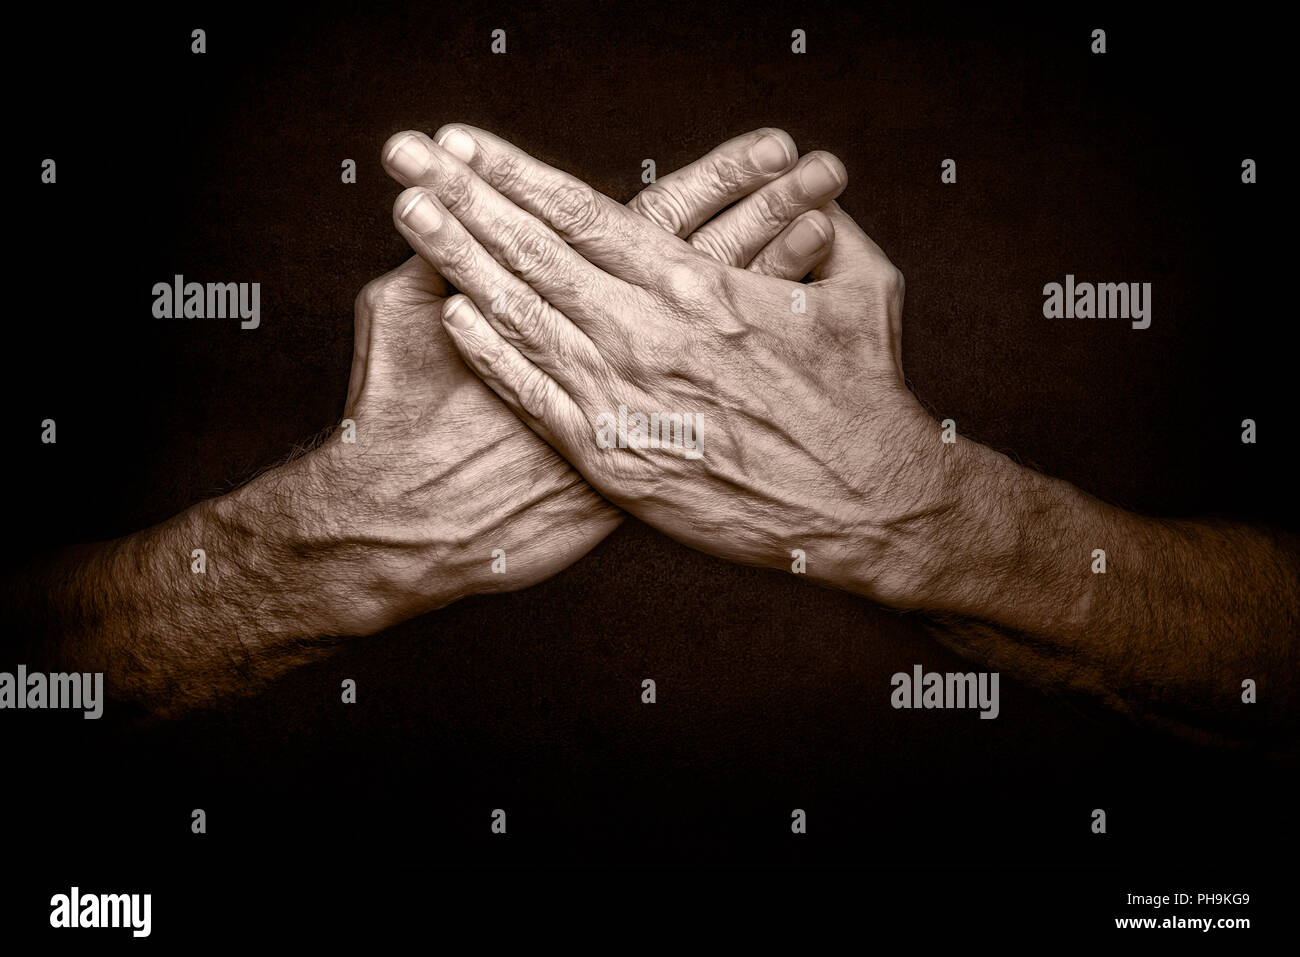 Photo of crossed man's hands on dark background, symbolizing protection of security Stock Photo